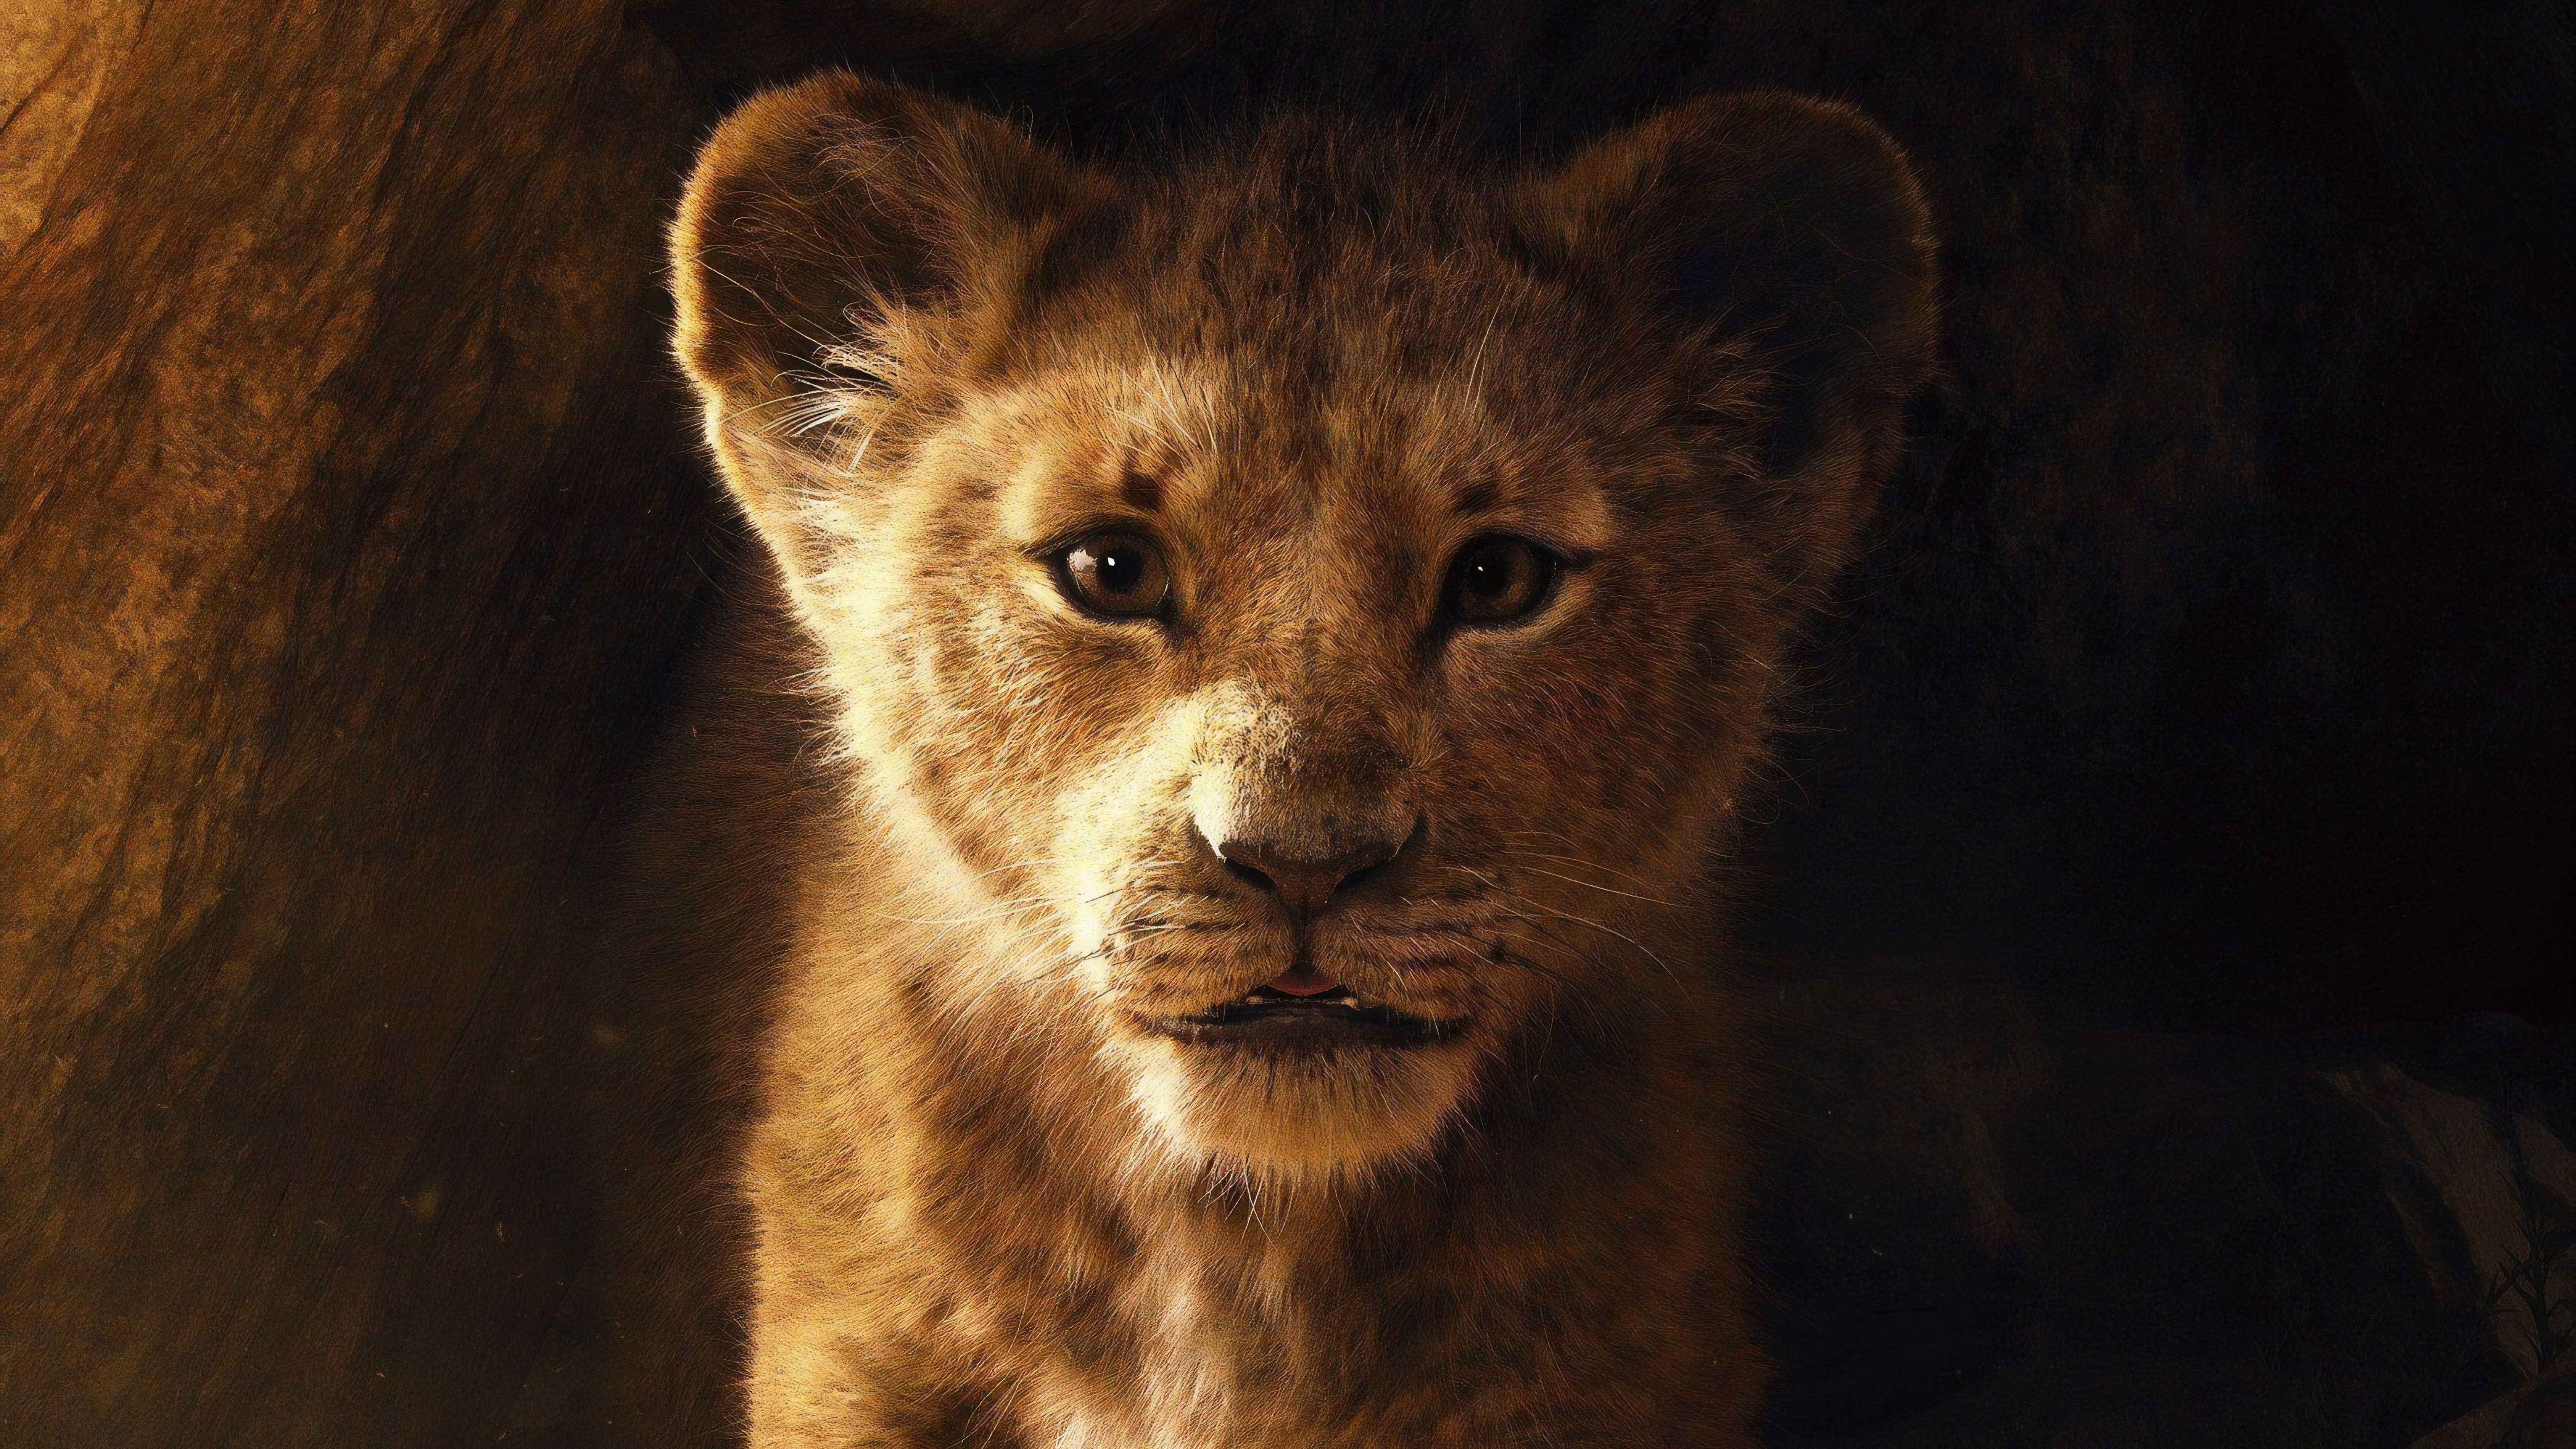 The Lion King 2019 5K Wallpapers